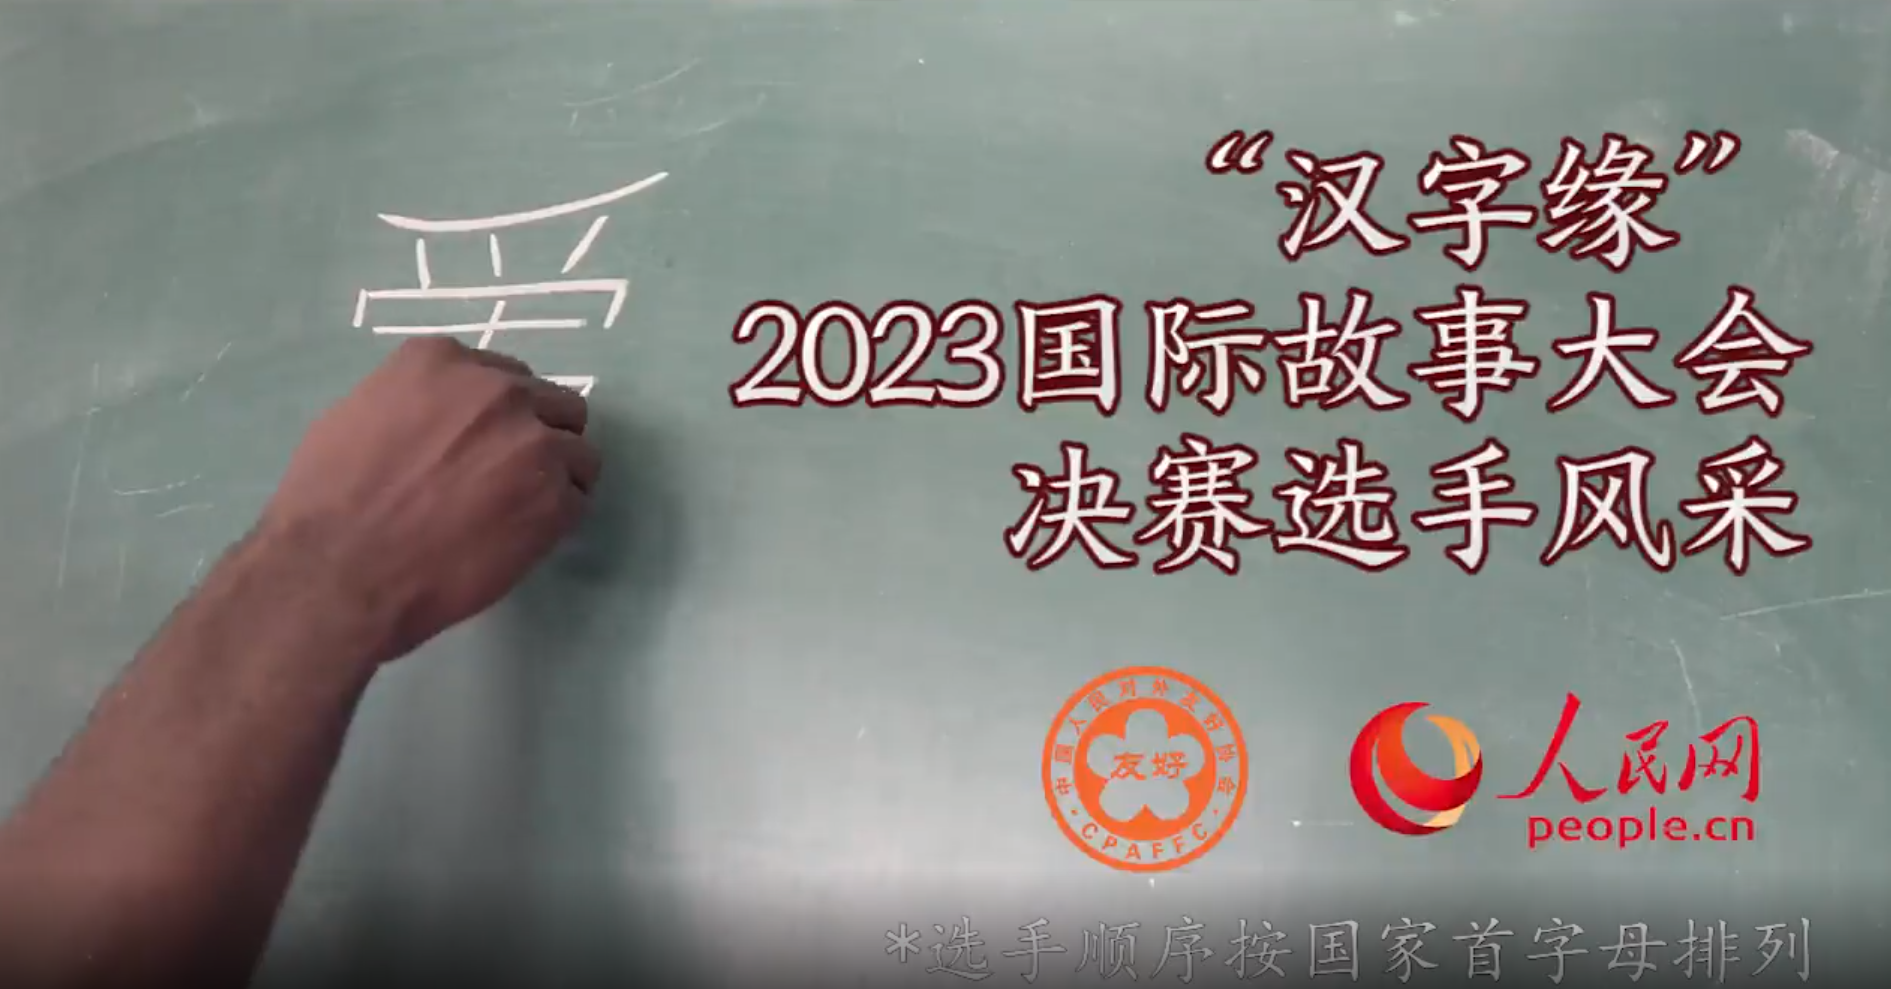 2023 "My Story of Chinese Hanzi" international competition releases list of finalists